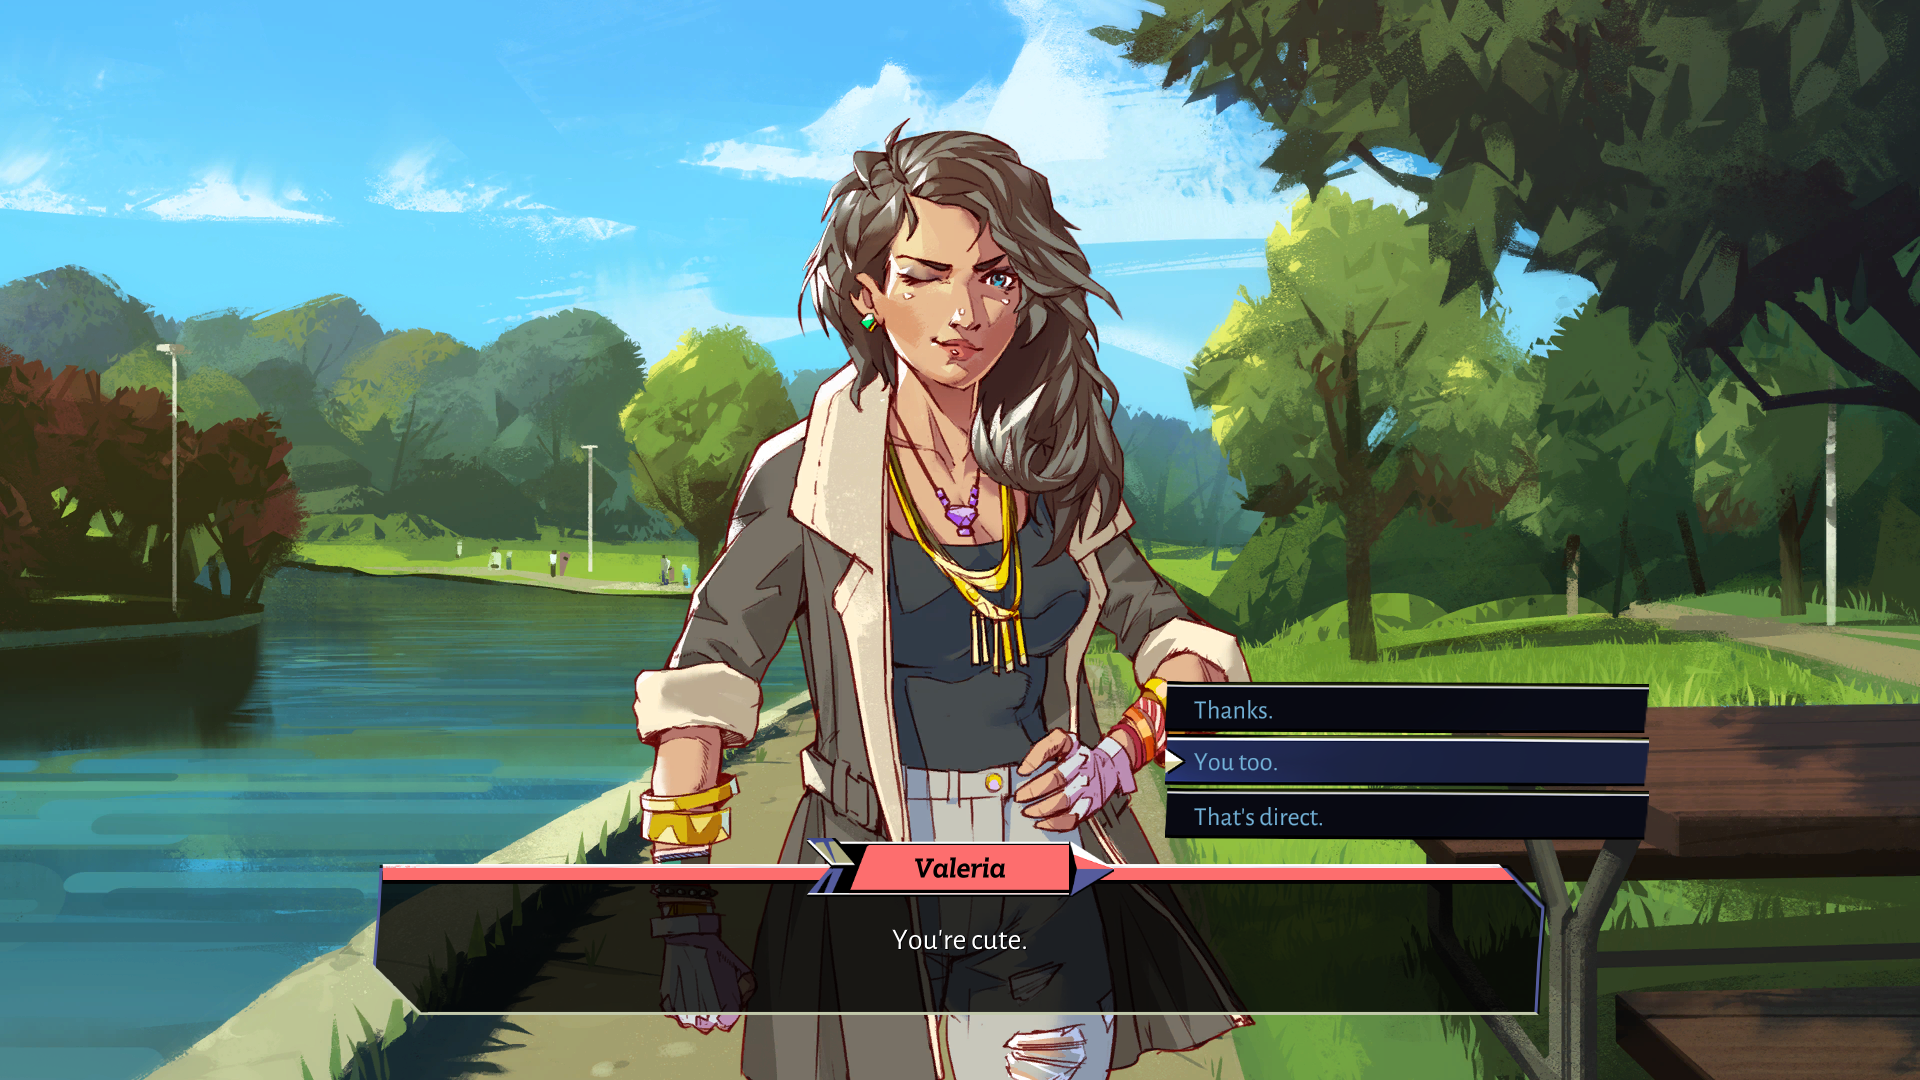 A screenshot of Valeria the dagger character telling the player character she thinks they're cute